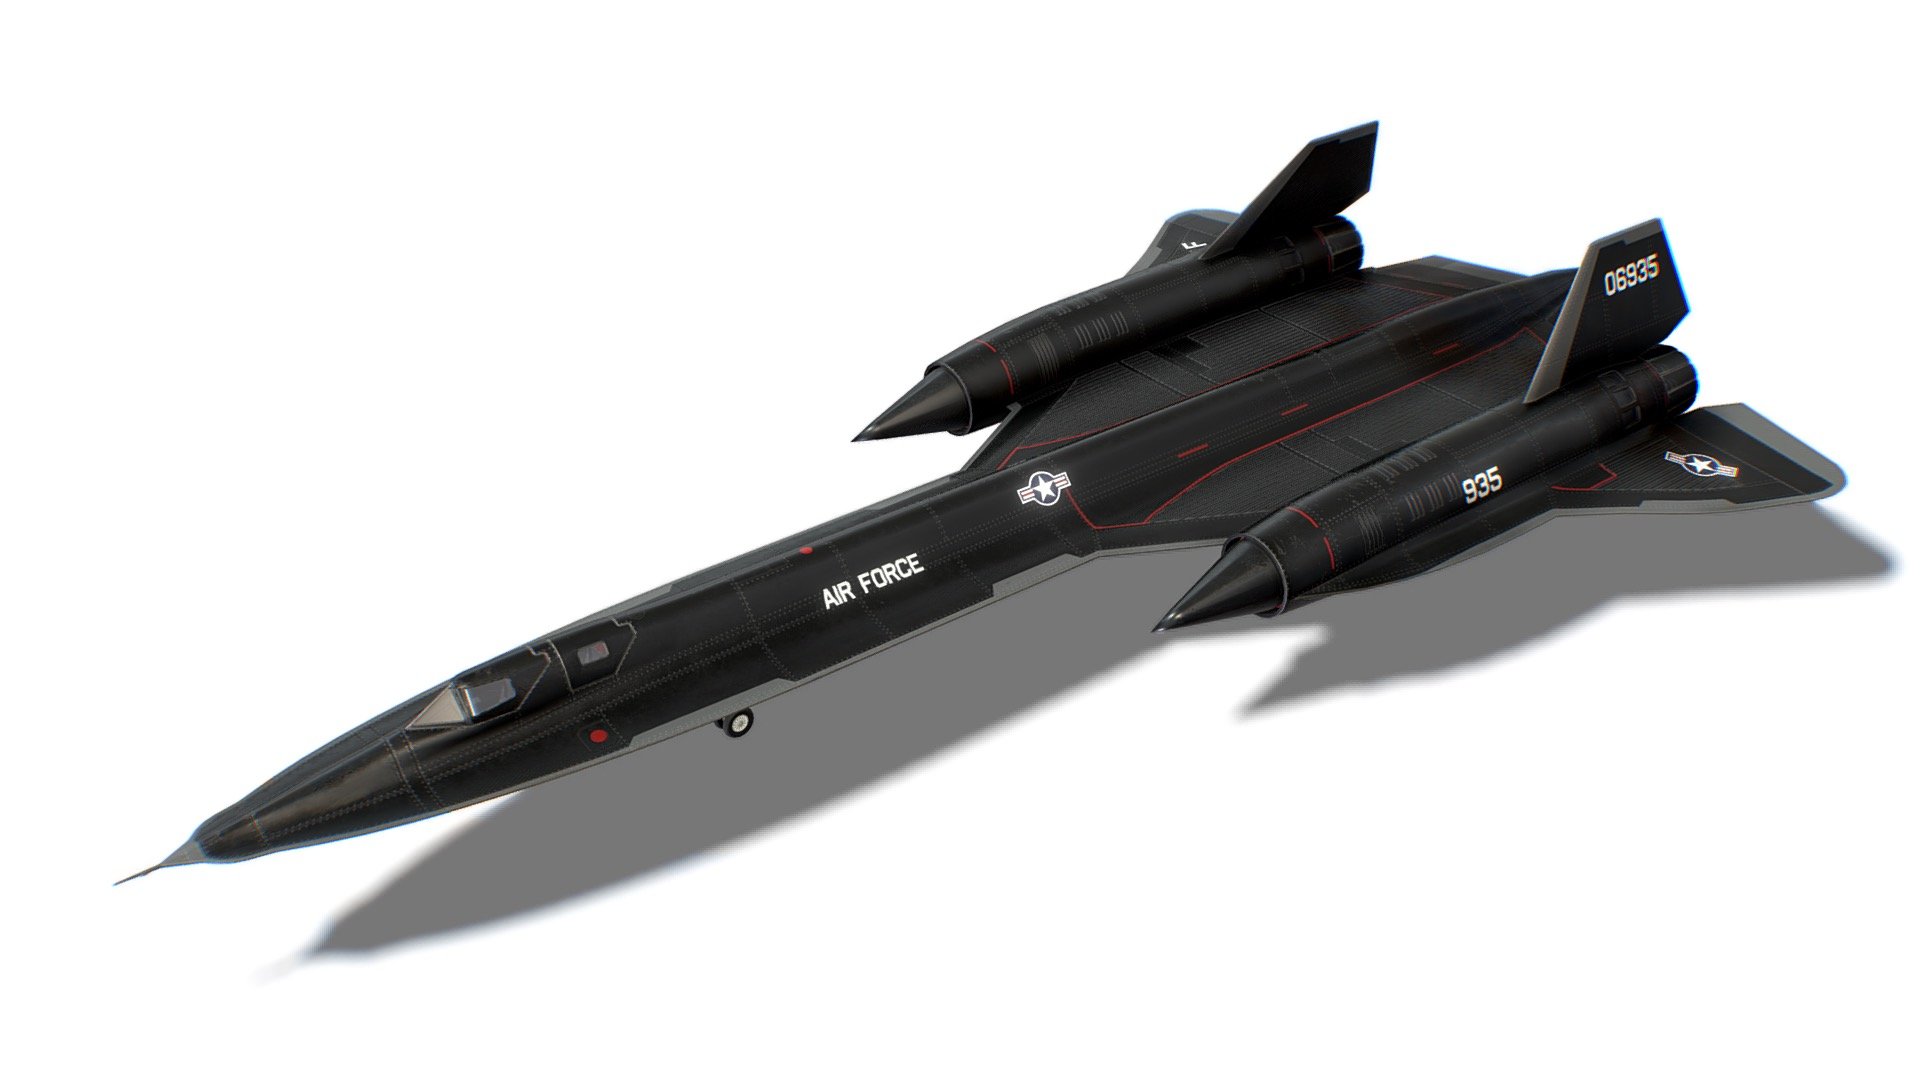 The model looks like a YF-12A Blackbird. All parts of the model were made in full accordance with the original. Each dynamical part is separated and has correct pivot points, that allow easy animation and use in games. 

Advanced information:
- single material for whole mesh;
- set of 4K PBR textures;
- set of 4K Unreal PBR textures;
- set of 4K Unity PBR textures;
- set of 4K CryEngine PBR textures;
- FBX, DAE, ABC, OBJ and X3D file formats;
- 4 level of details;

Mesh details:
LOD0 - 11870
LOD1 - 5934
LOD2 - 2967
LOD3 - 300 - YF-12A Blackbird Jet Fighter Aircraft - 3D model by FreakGames 3d model